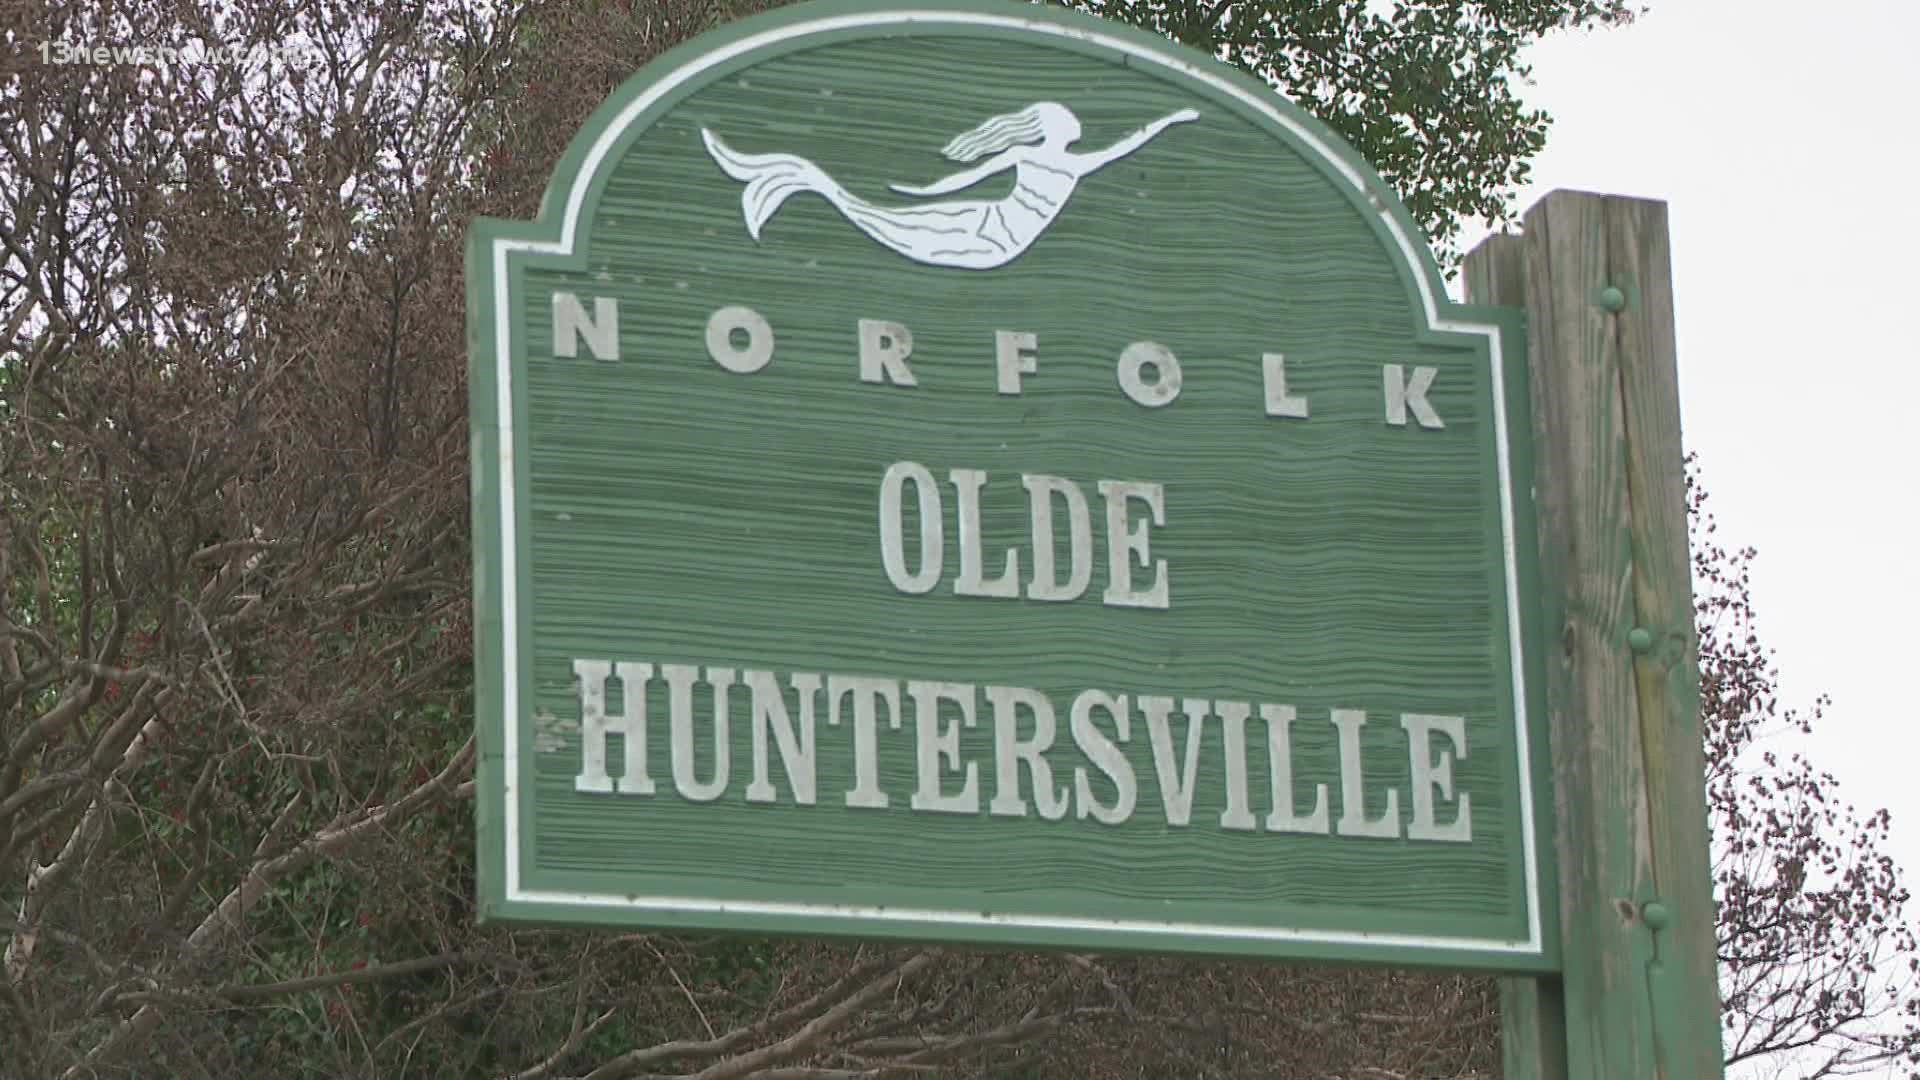 Neighborhoods like Olde Huntersville are proactively creating and implementing solutions to build healthier communities.